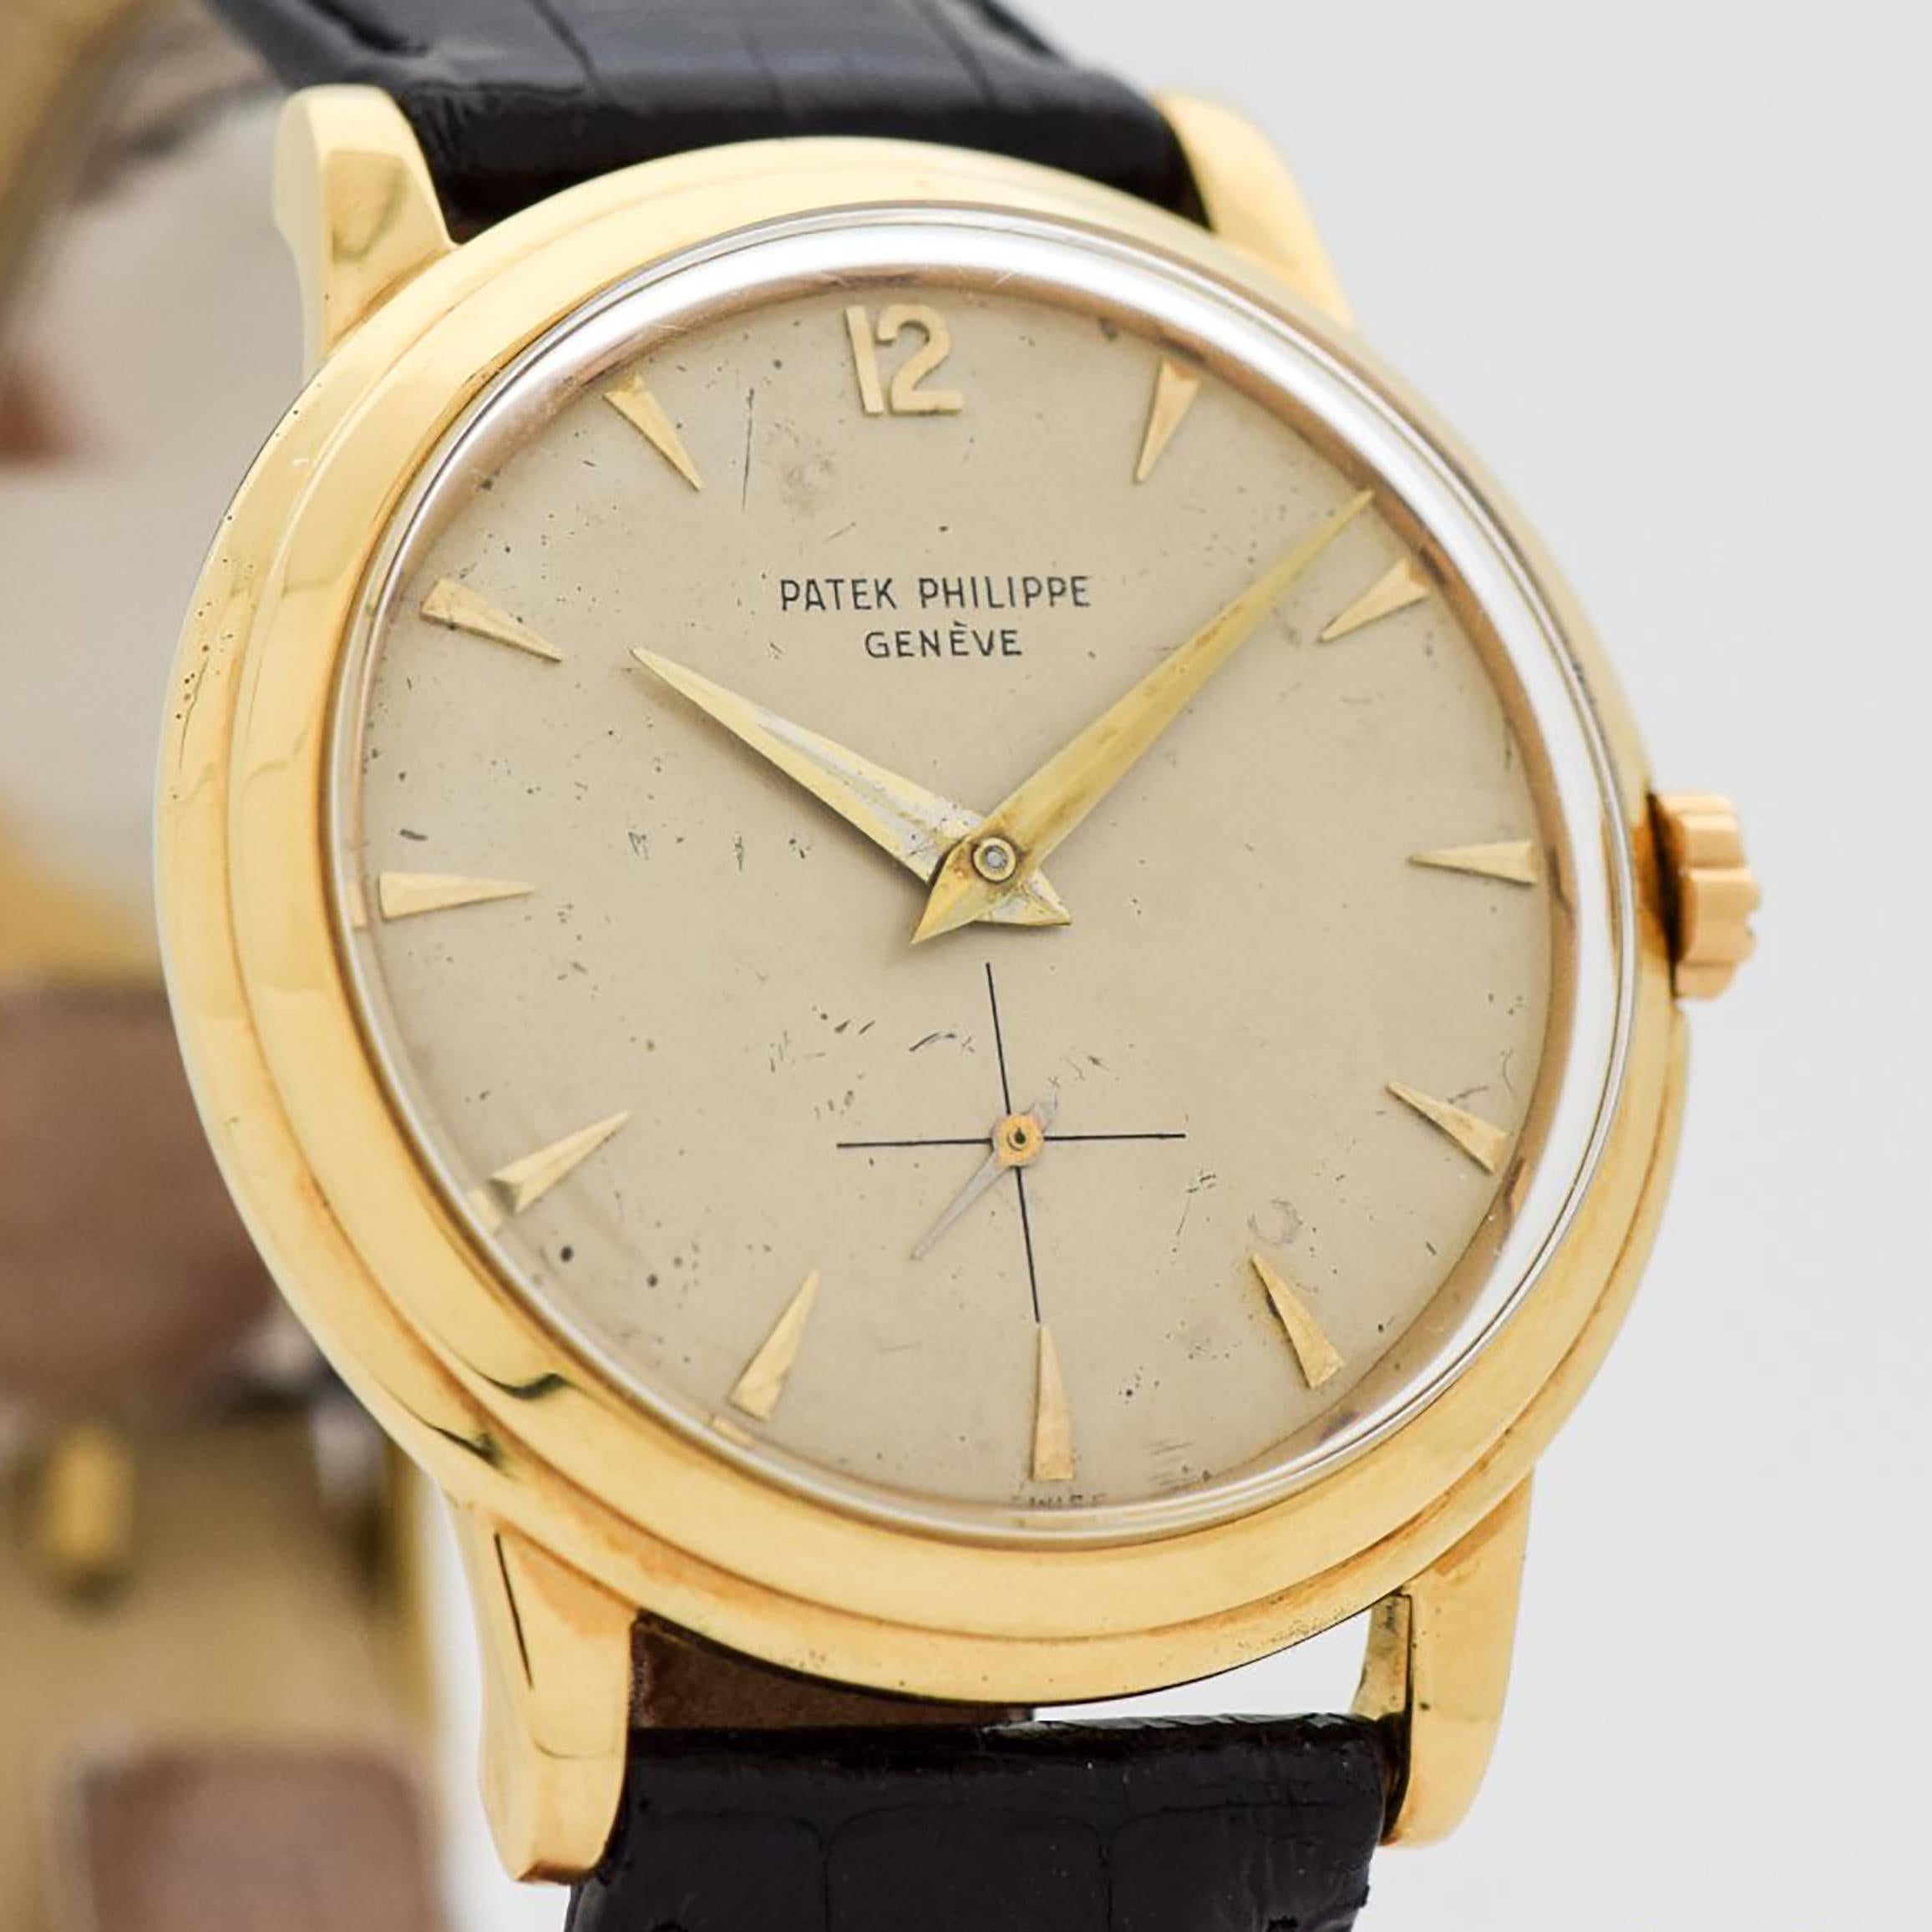 1956 Vintage Patek Philippe Calatrava Disco Volante Automatic Ref. 2552 18k Yellow Gold watch with Original Silver Dial with Applied Gold Arabic 12 and Elongated Beveled Arrow Markers with Patek Philippe Extract From The Archives Document. 35mm x